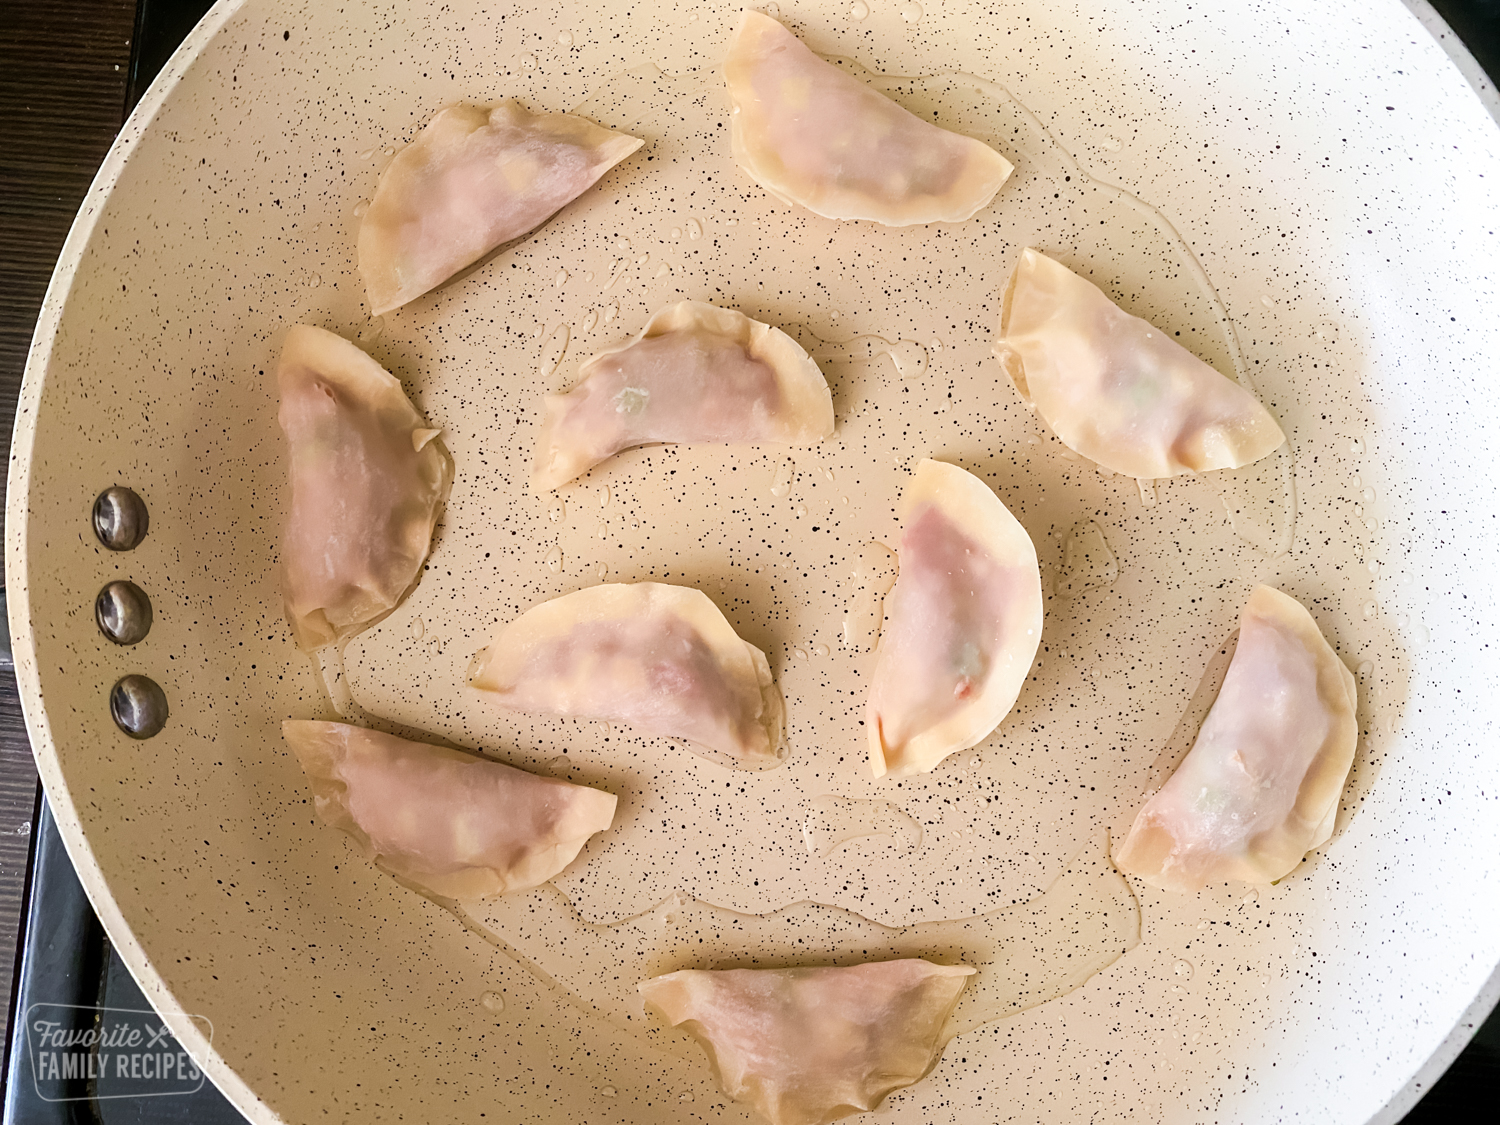 Ten uncooked potstickers being cooked in oil in a skillet